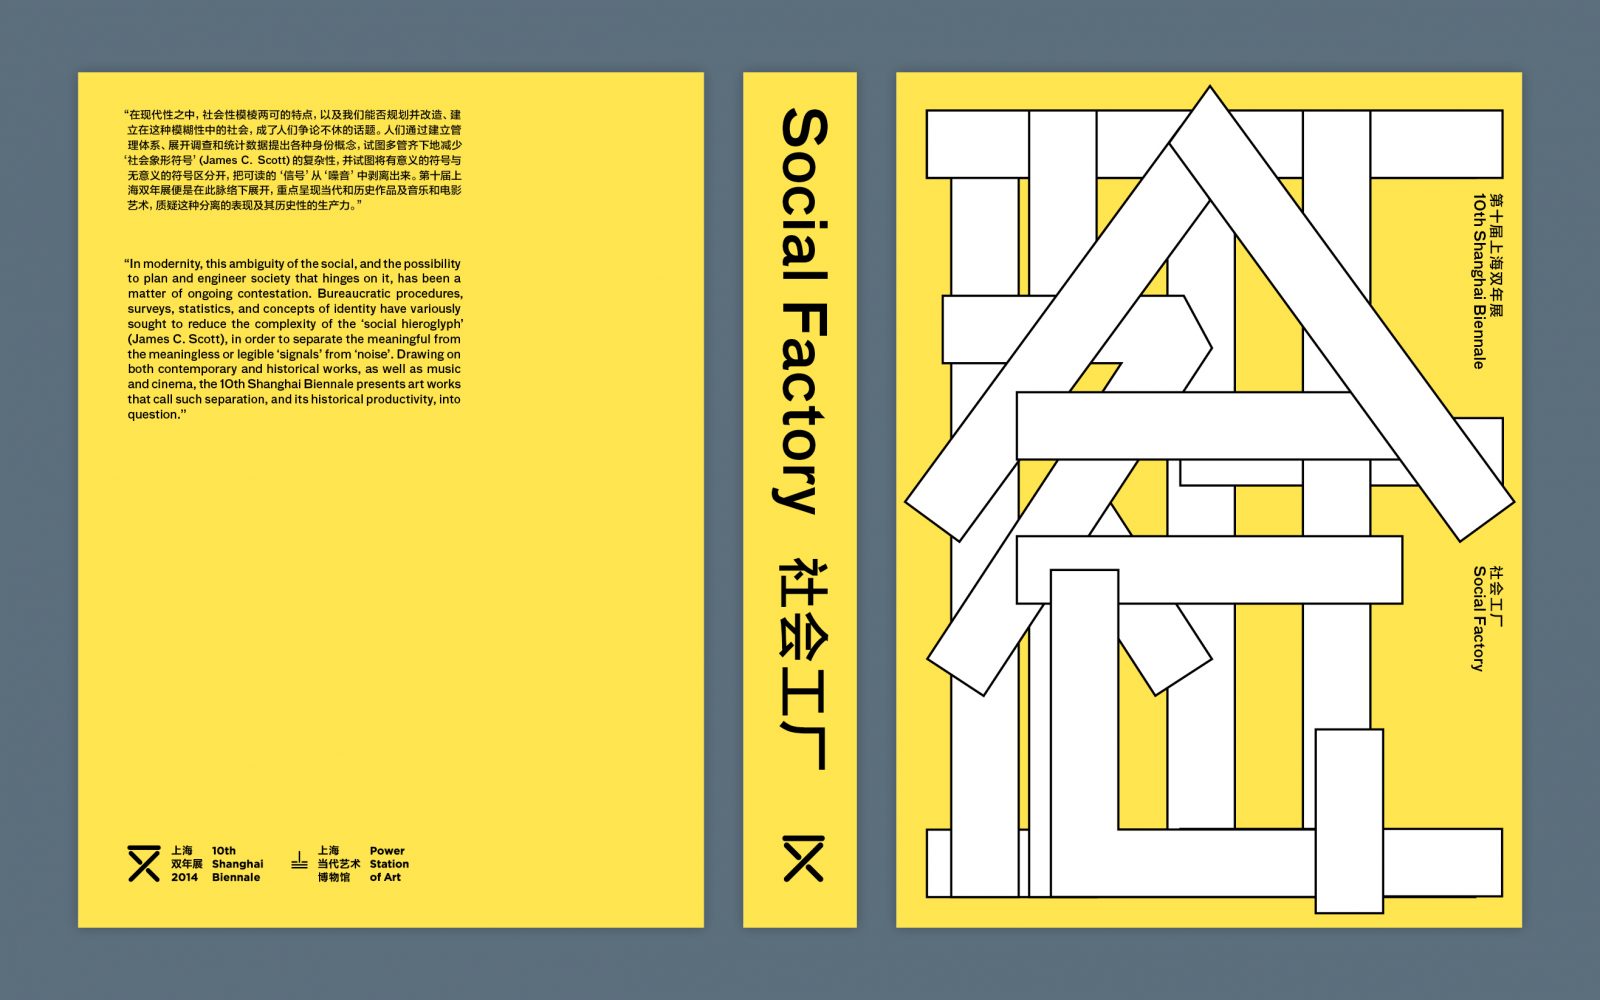 Maarten Kanters - 10th Shanghai Biennale: Social Factory – identity design and printed collateral<br />
Assisting Lu Liang / The Exercises.
